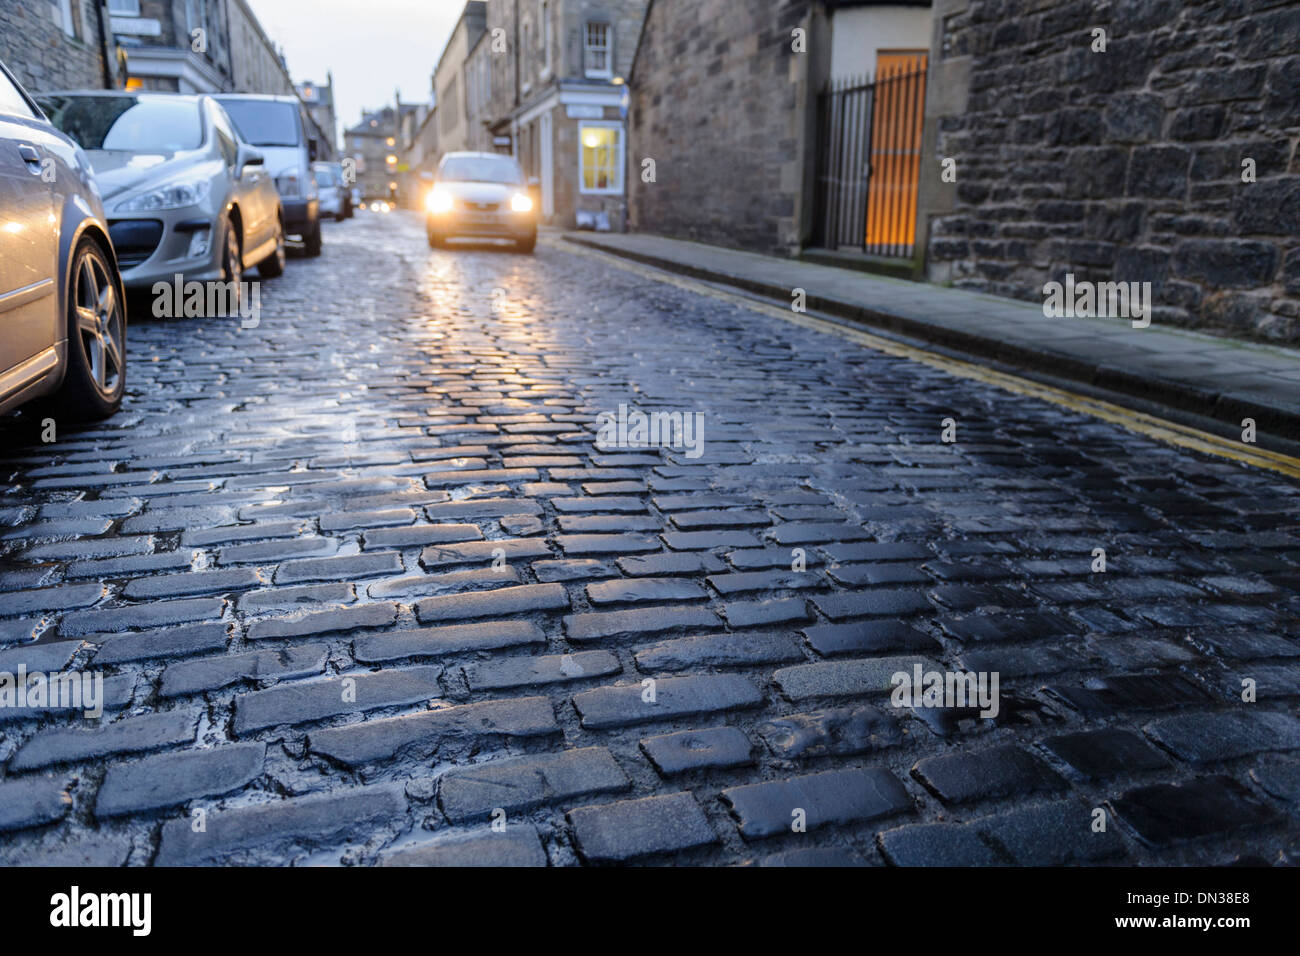 United Kingdom, cars on coblbled street in wet winter conditions Stock Photo